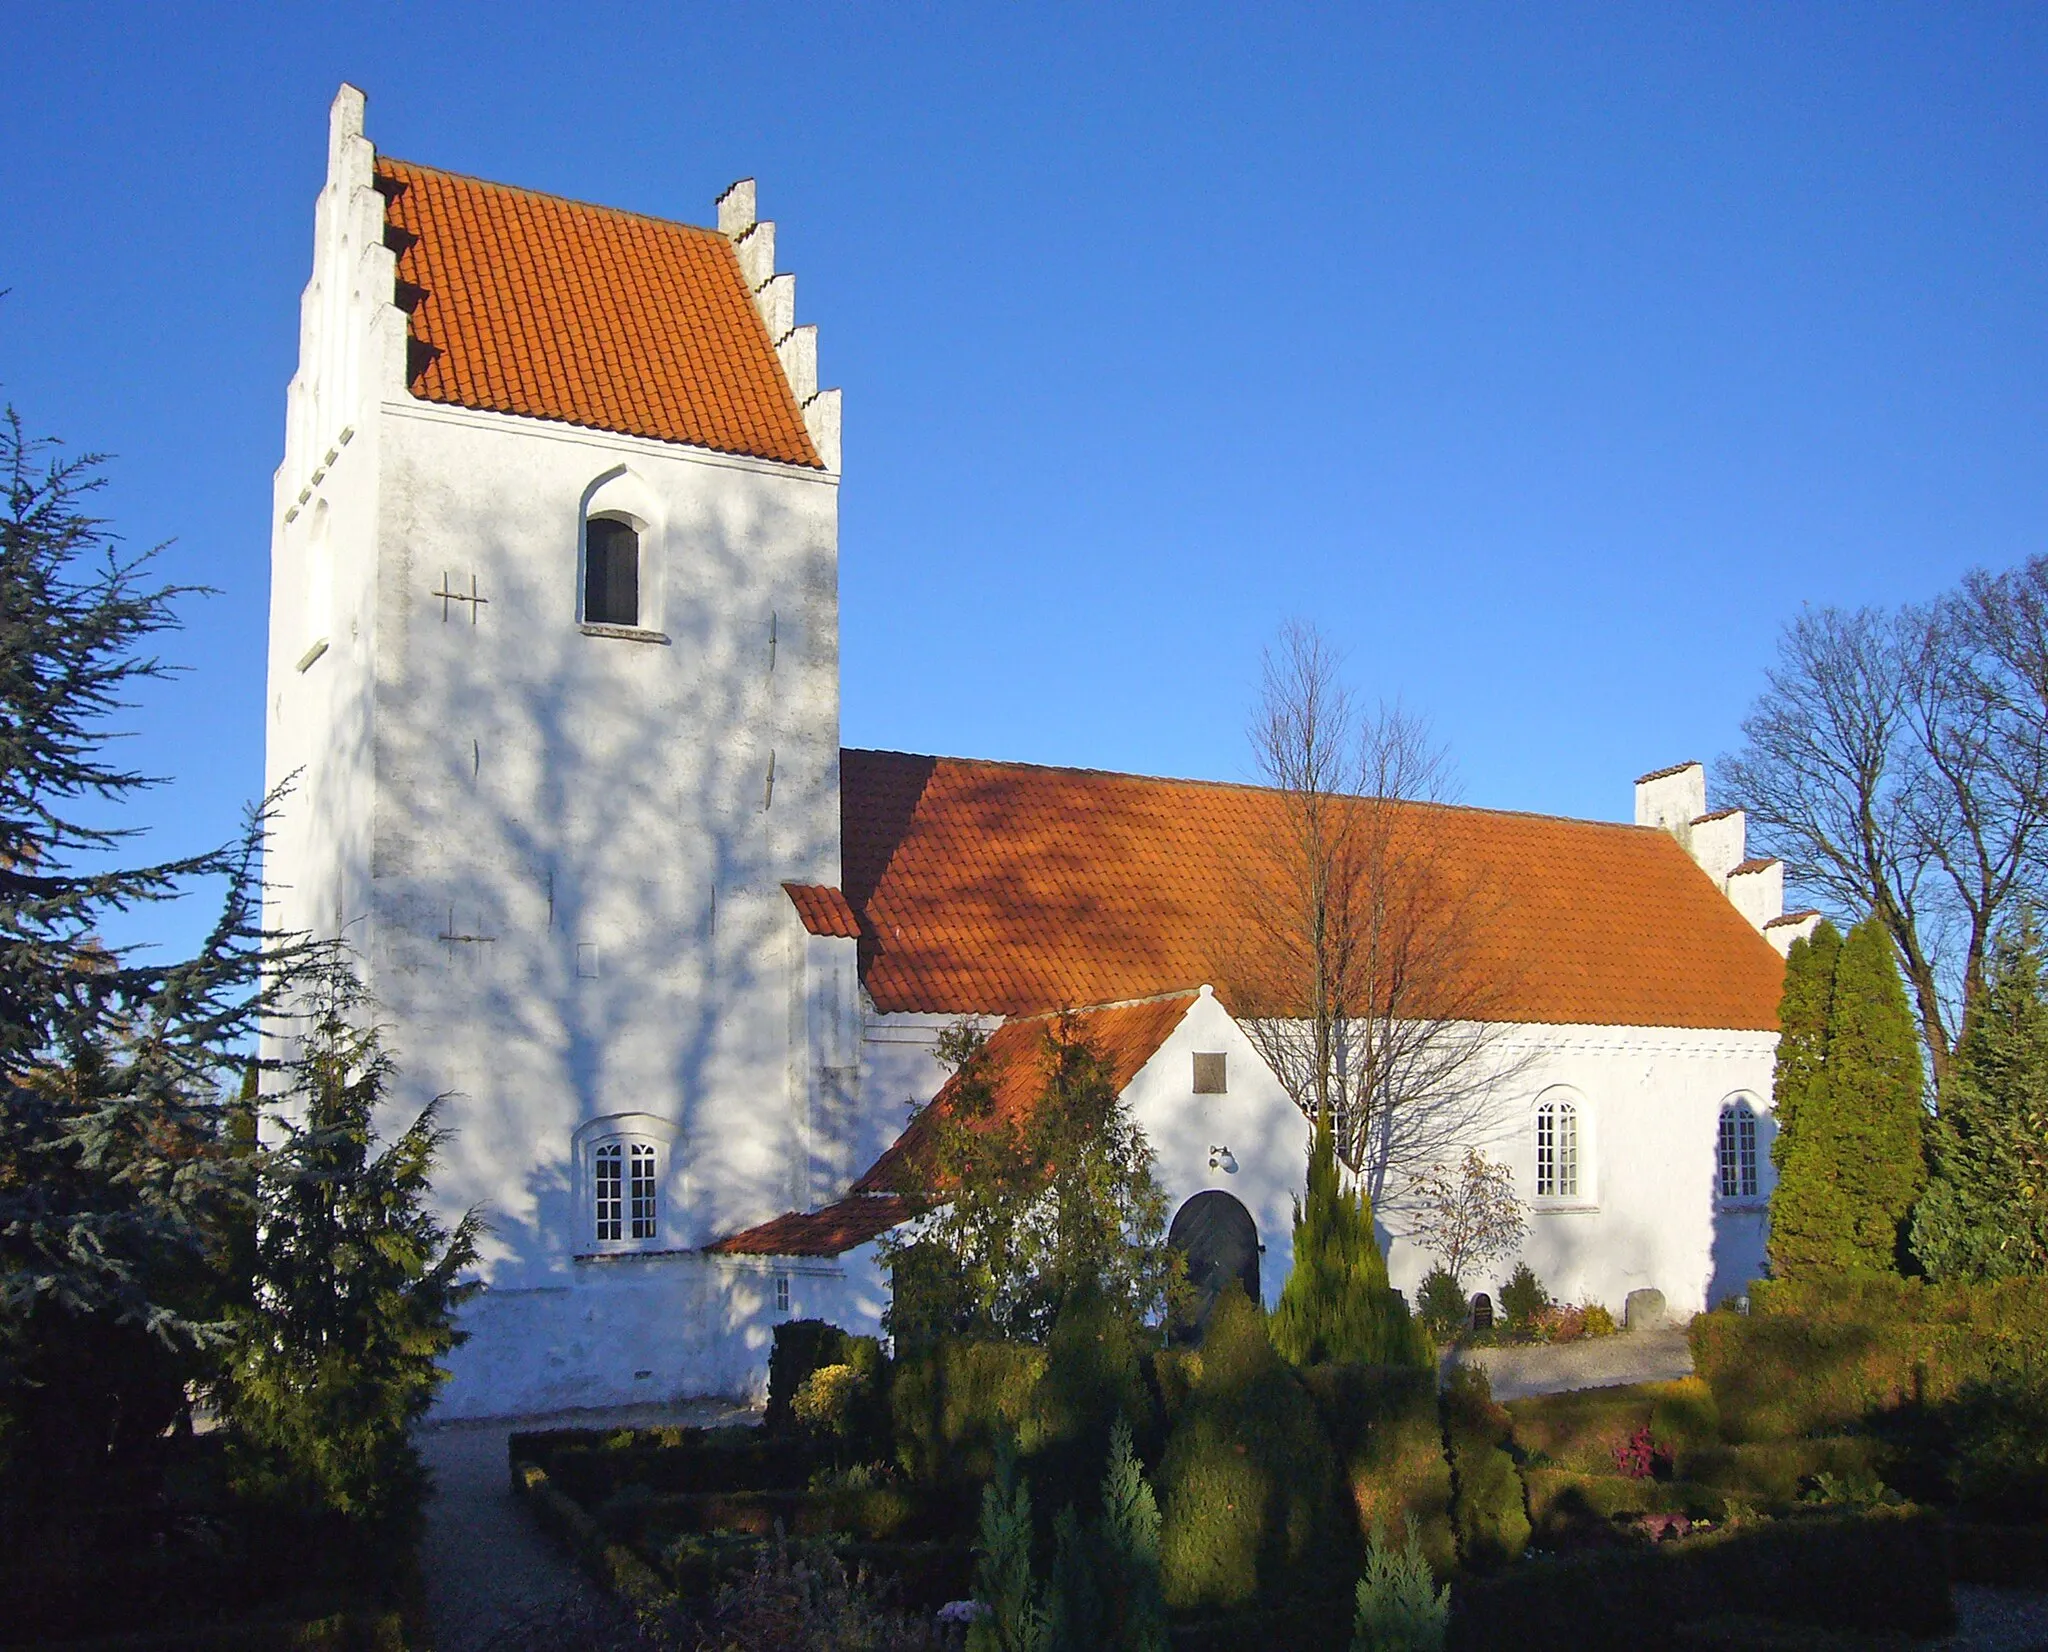 Photo showing: Fløng Kirke, Denmark. Camera location 55° 39′ 42.12″ N, 12° 10′ 50.88″ E View this and other nearby images on: OpenStreetMap 55.661700;   12.180800
Fløng Kirke